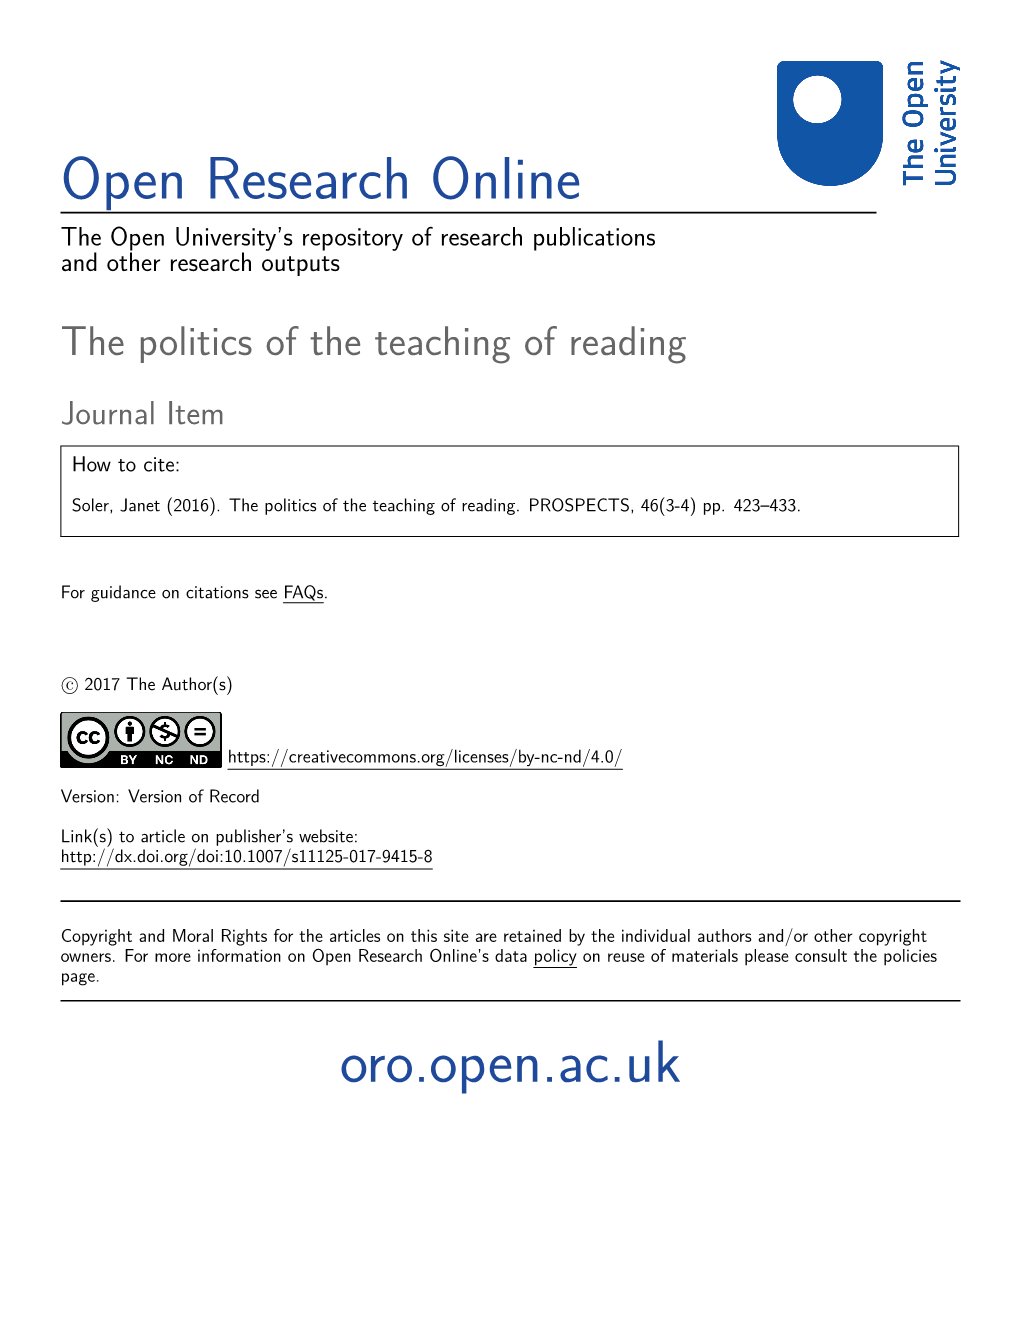 The Politics of the Teaching of Reading